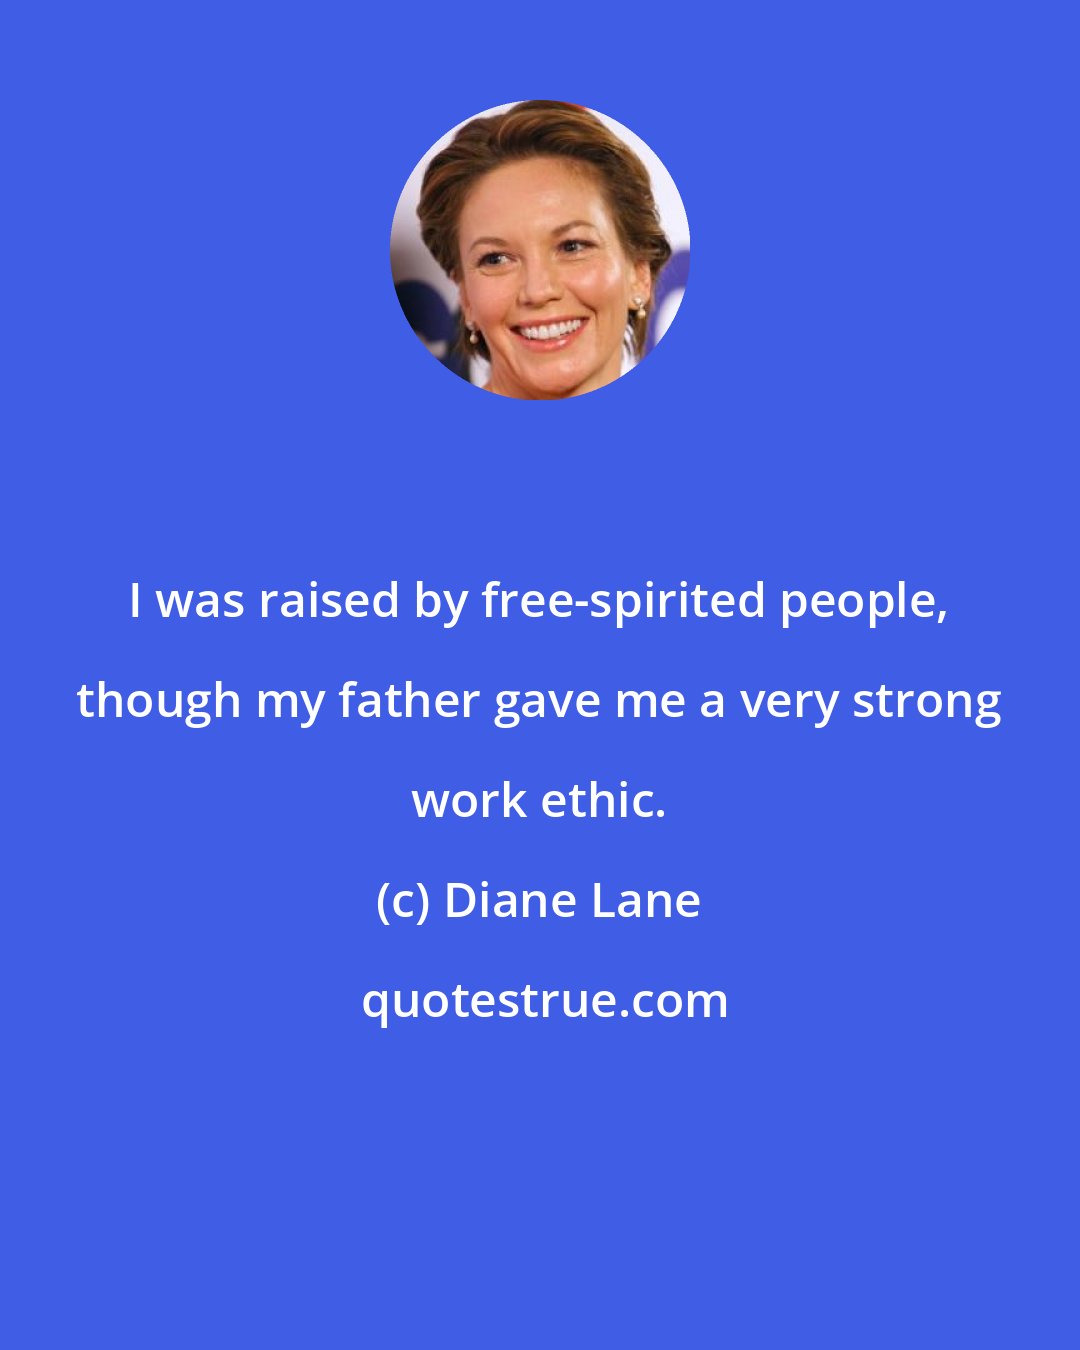 Diane Lane: I was raised by free-spirited people, though my father gave me a very strong work ethic.